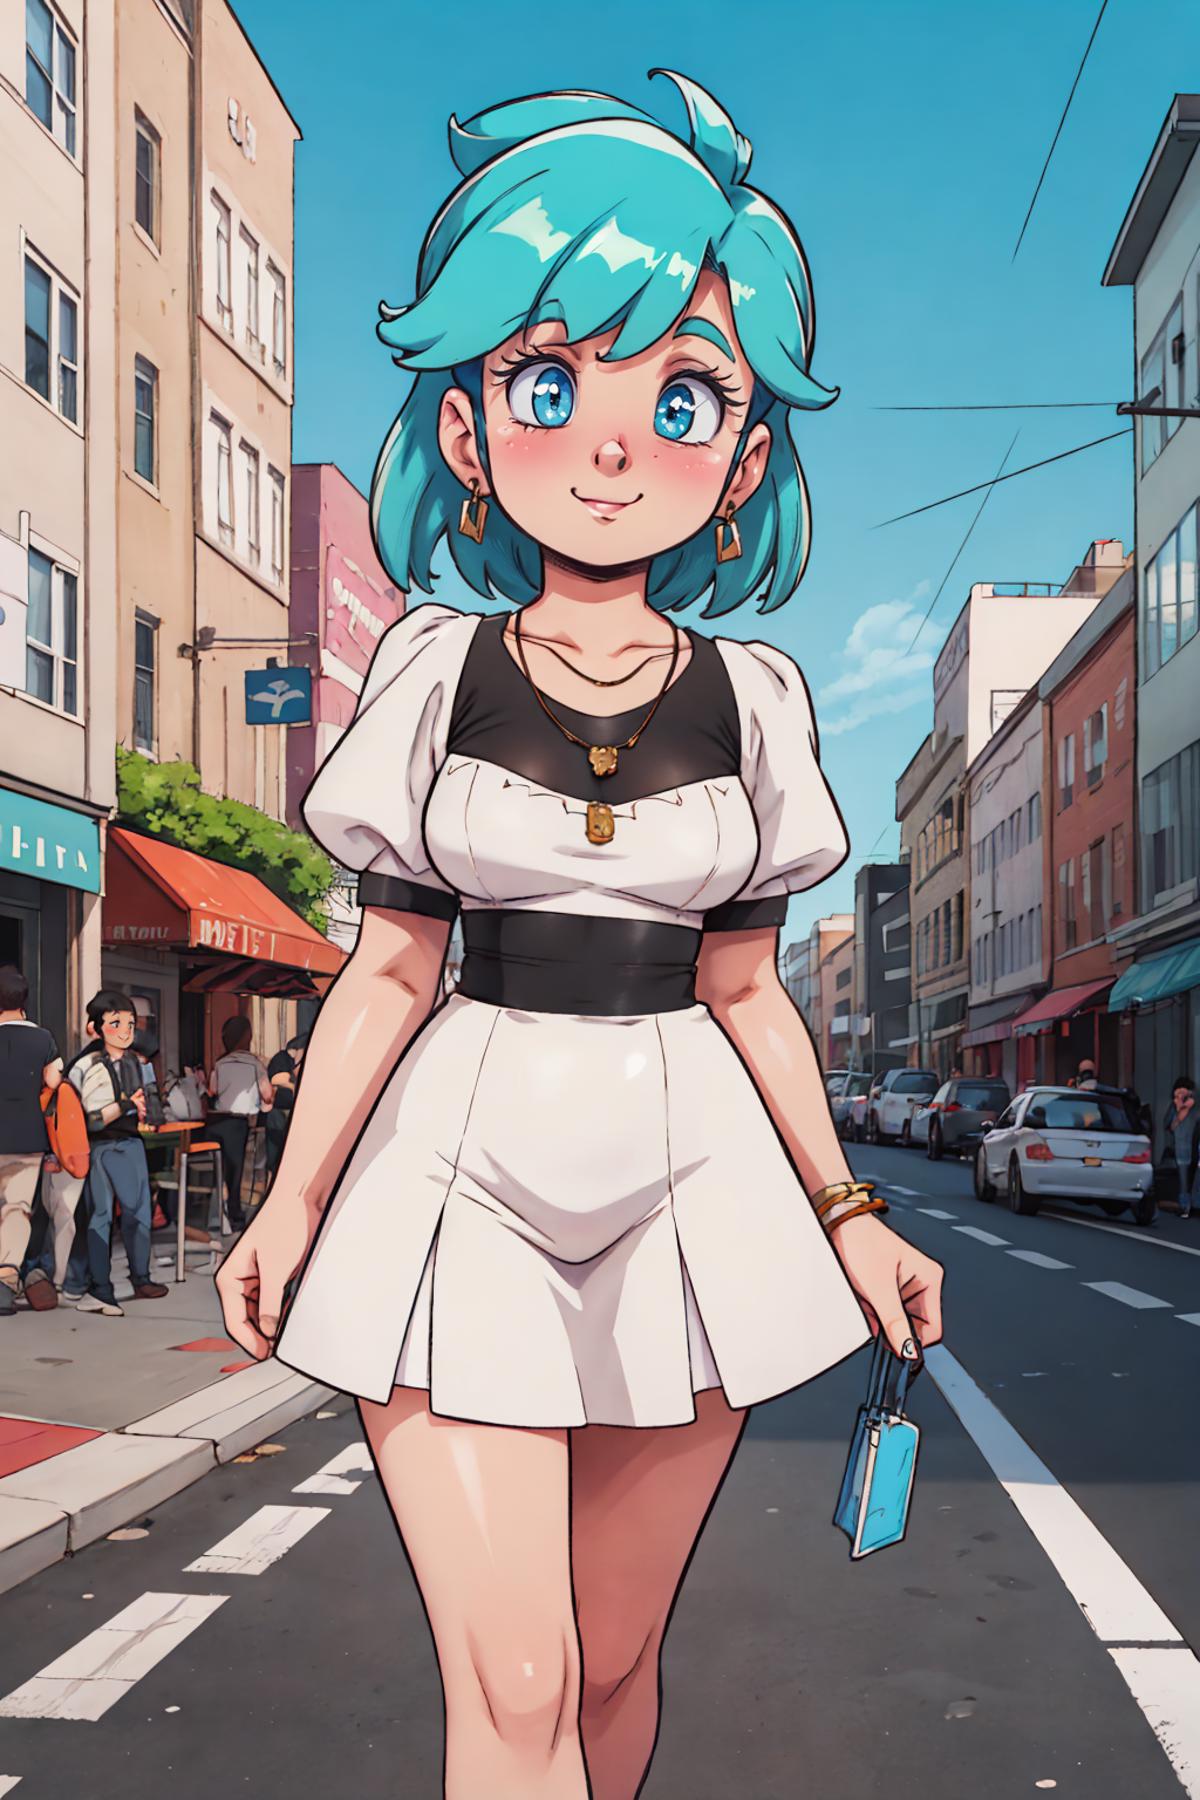 A woman with blue hair wearing a white dress and black belt is walking down a street.